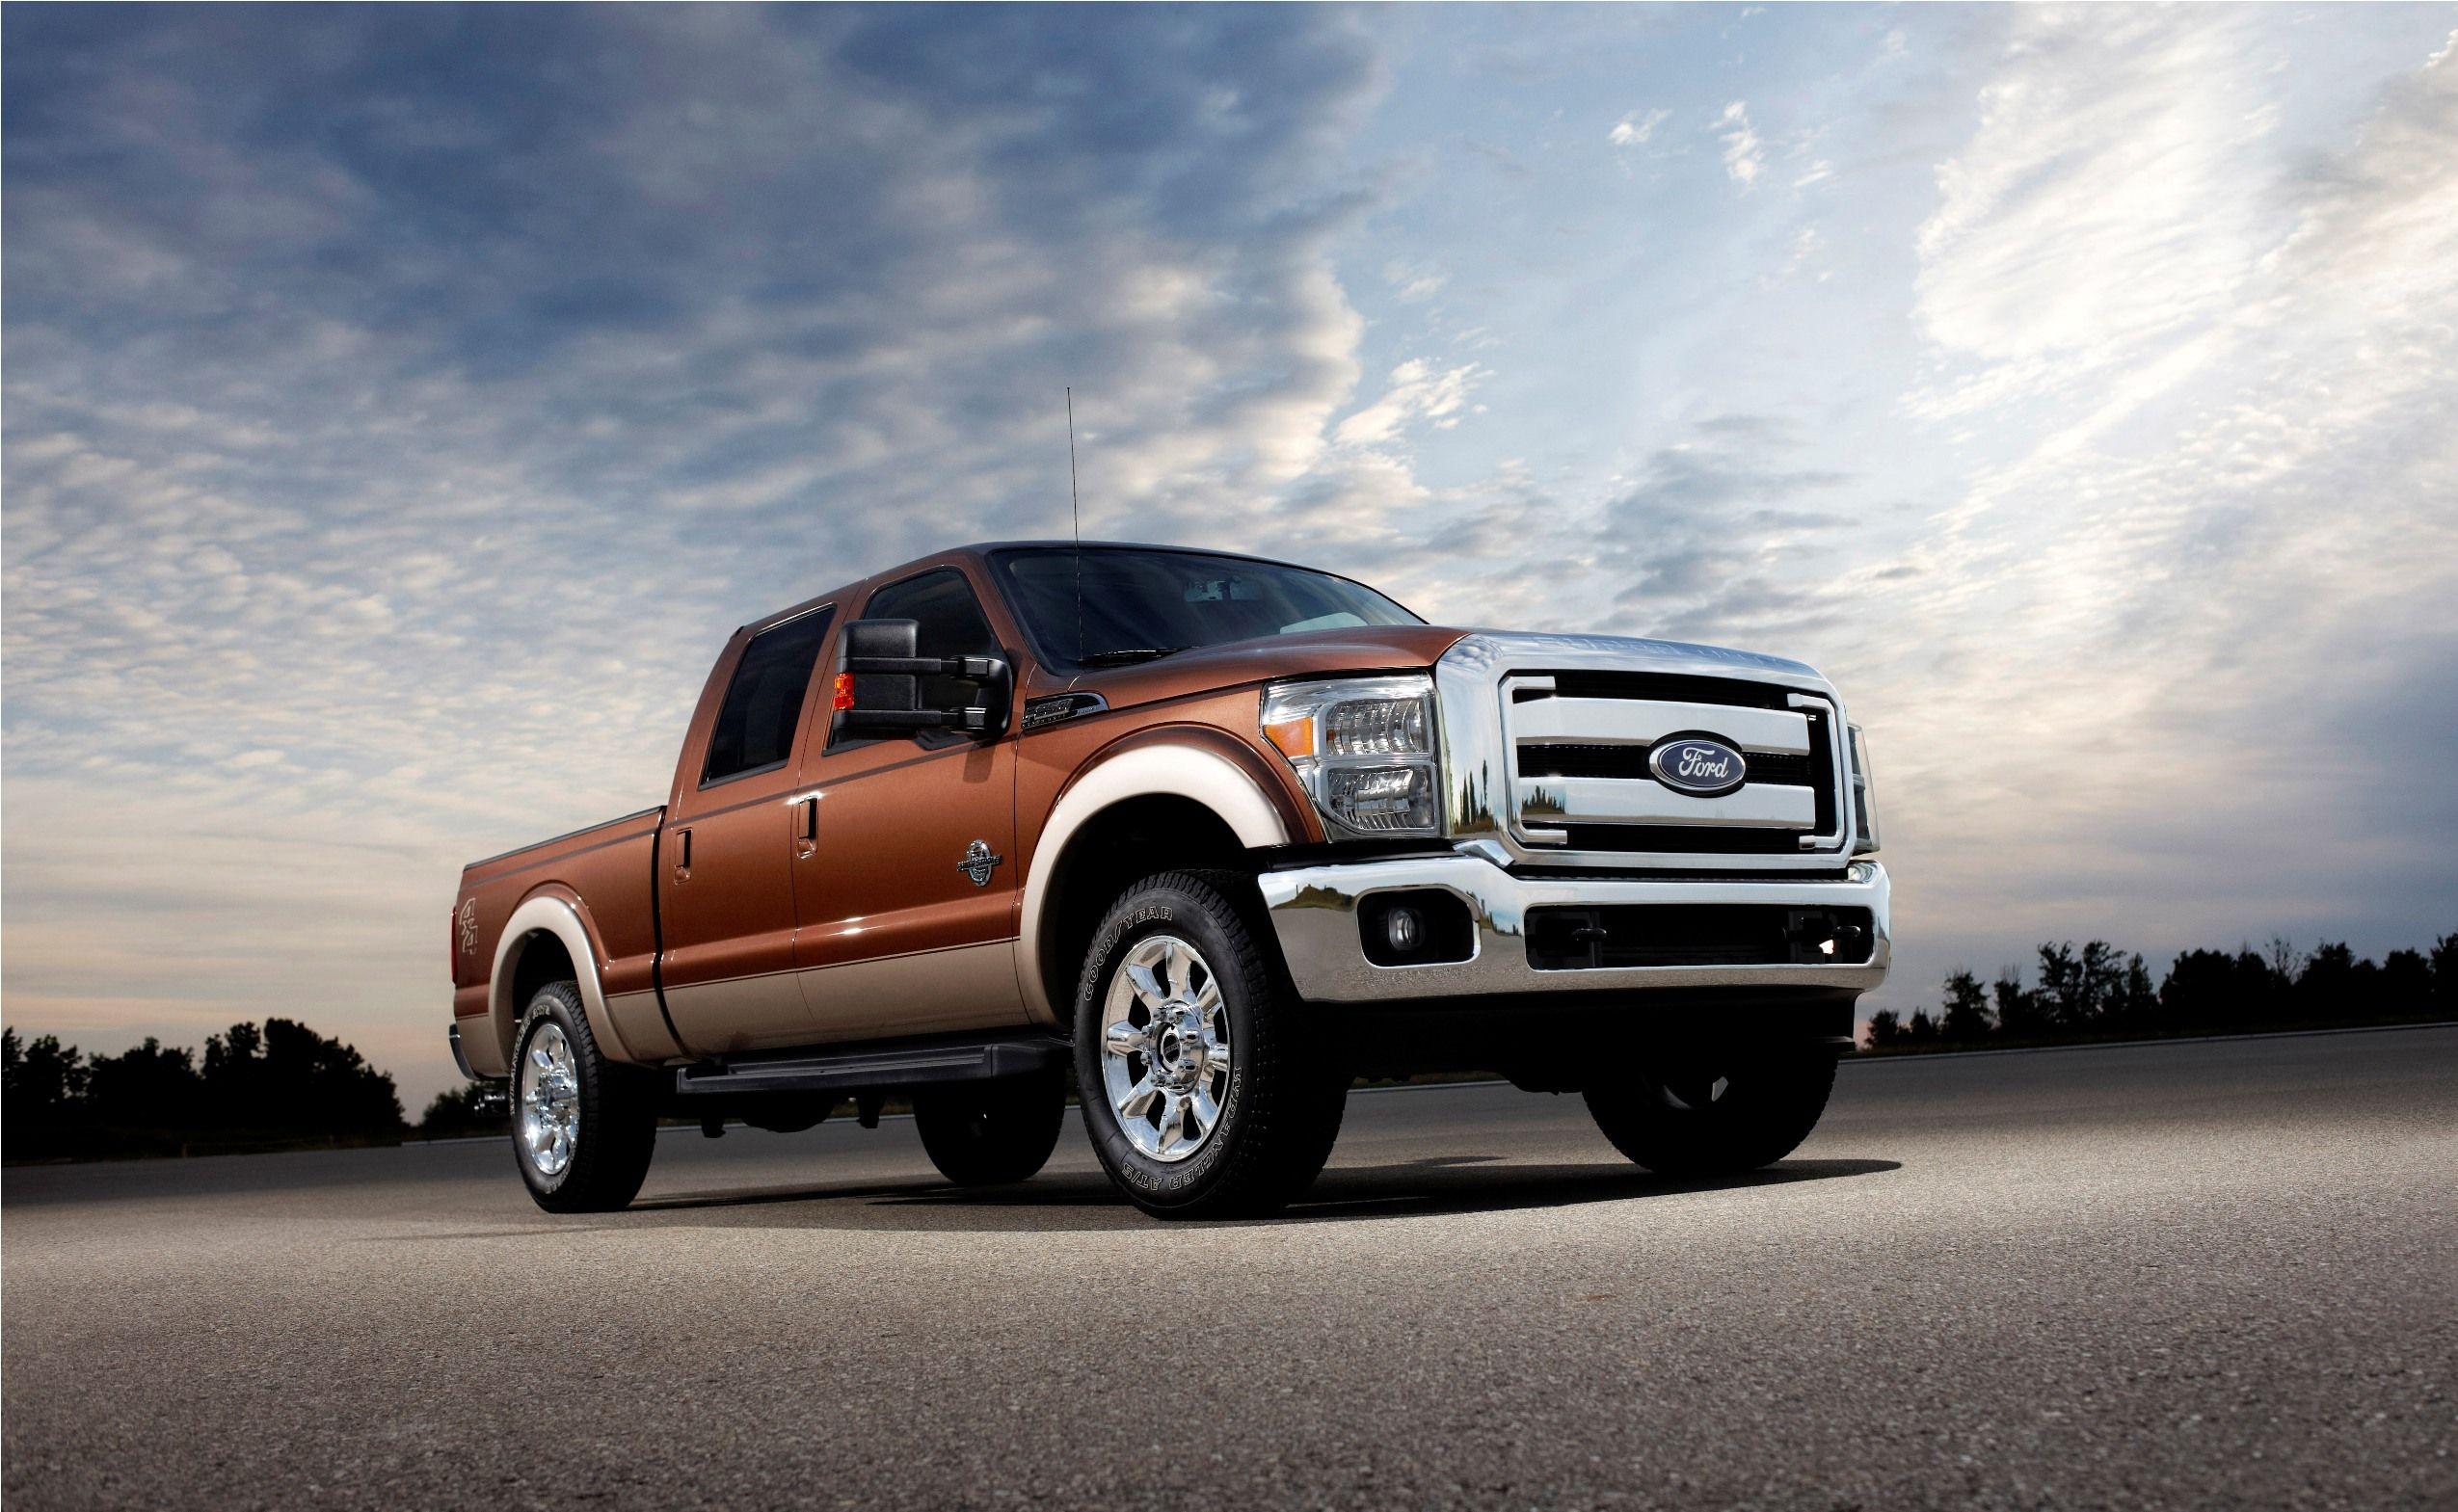 Free Download Ford Truck Background